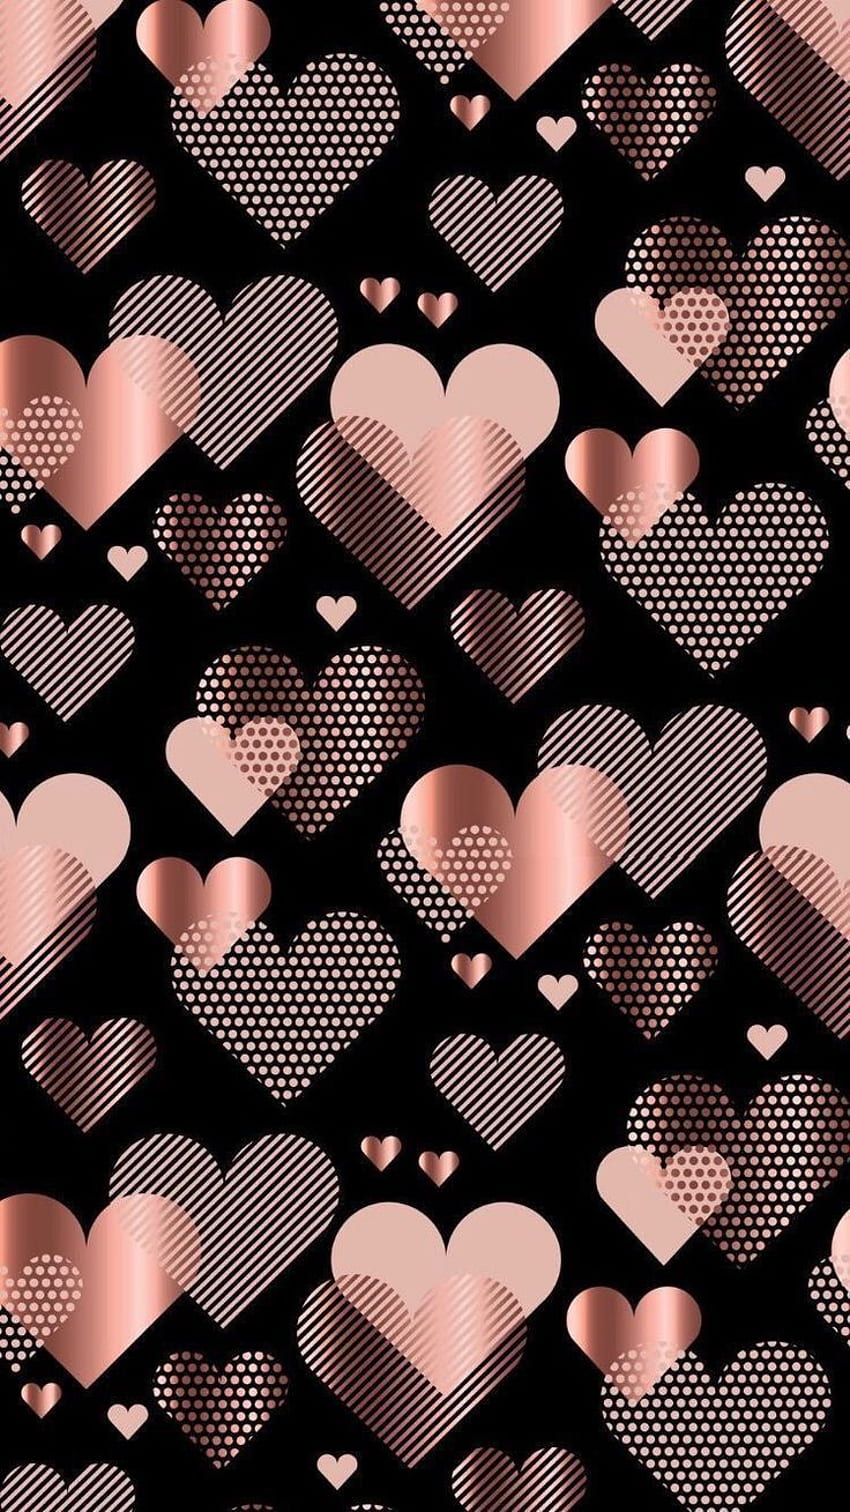 Hearts Pattern for Valentines Day Pink Hearts Petals Pink Heart Wallpaper  Design on Black Background Stock Vector  Illustration of greeting  design 207891637